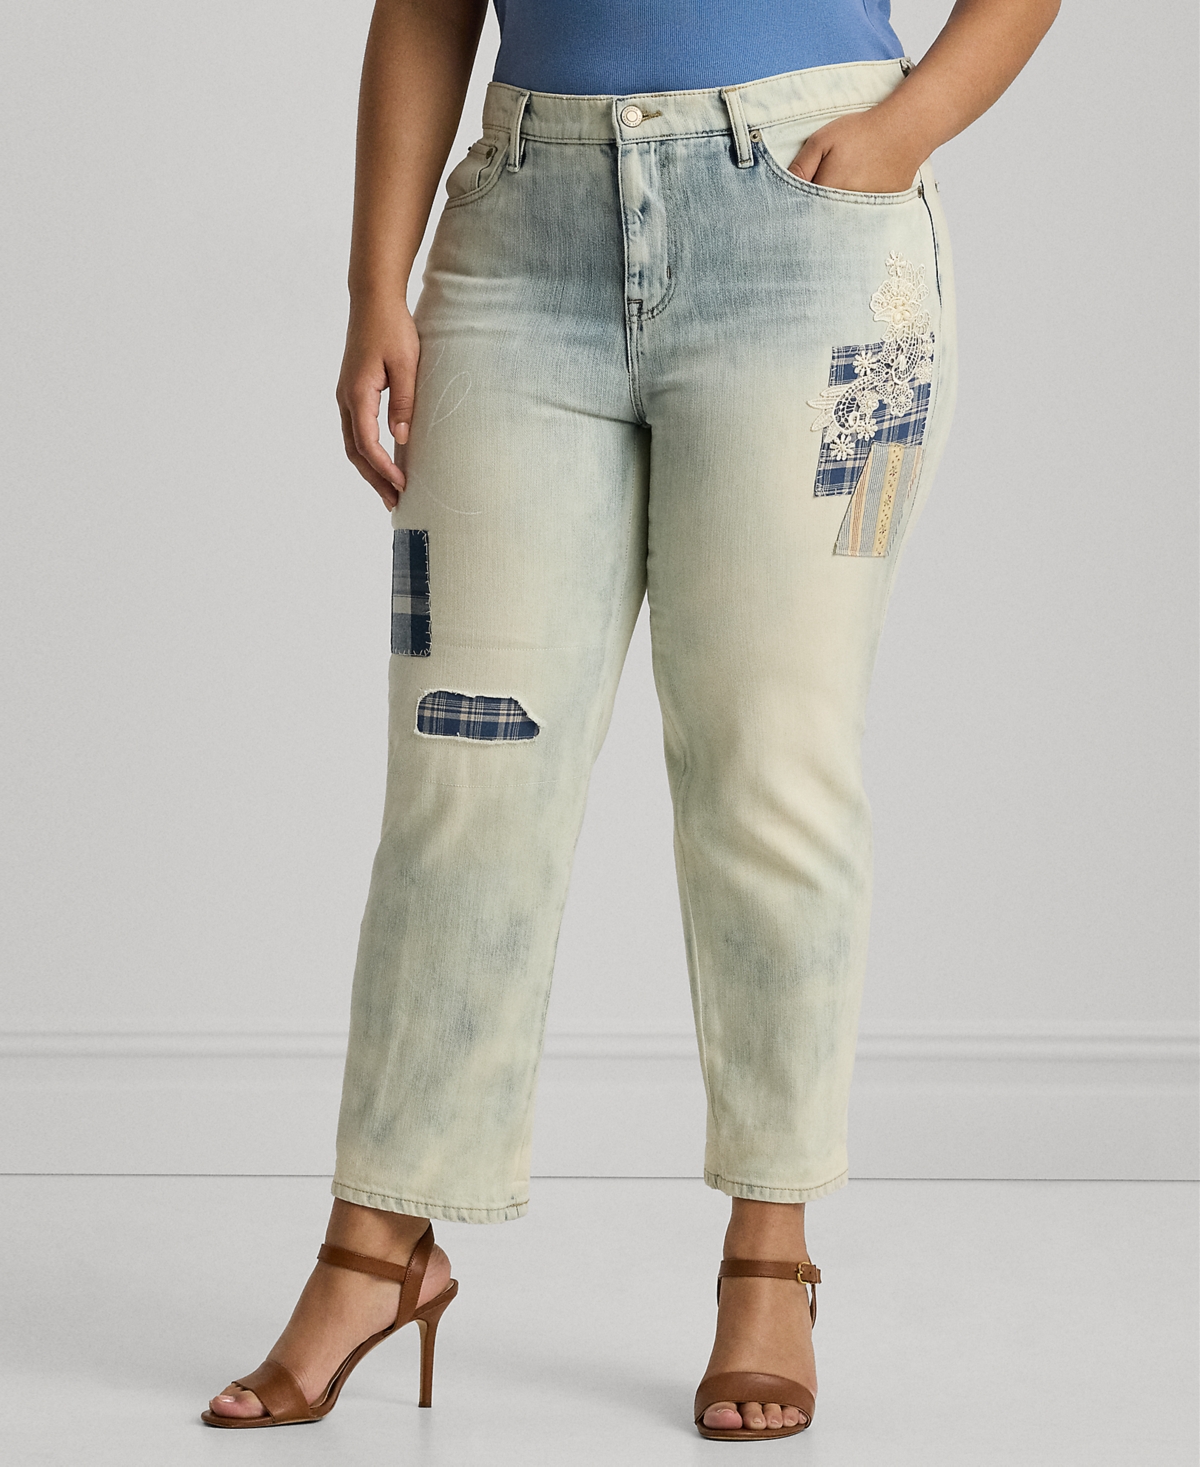 Plus Size Mid-Rise Tapered Patchwork Jeans - Belleville Wash